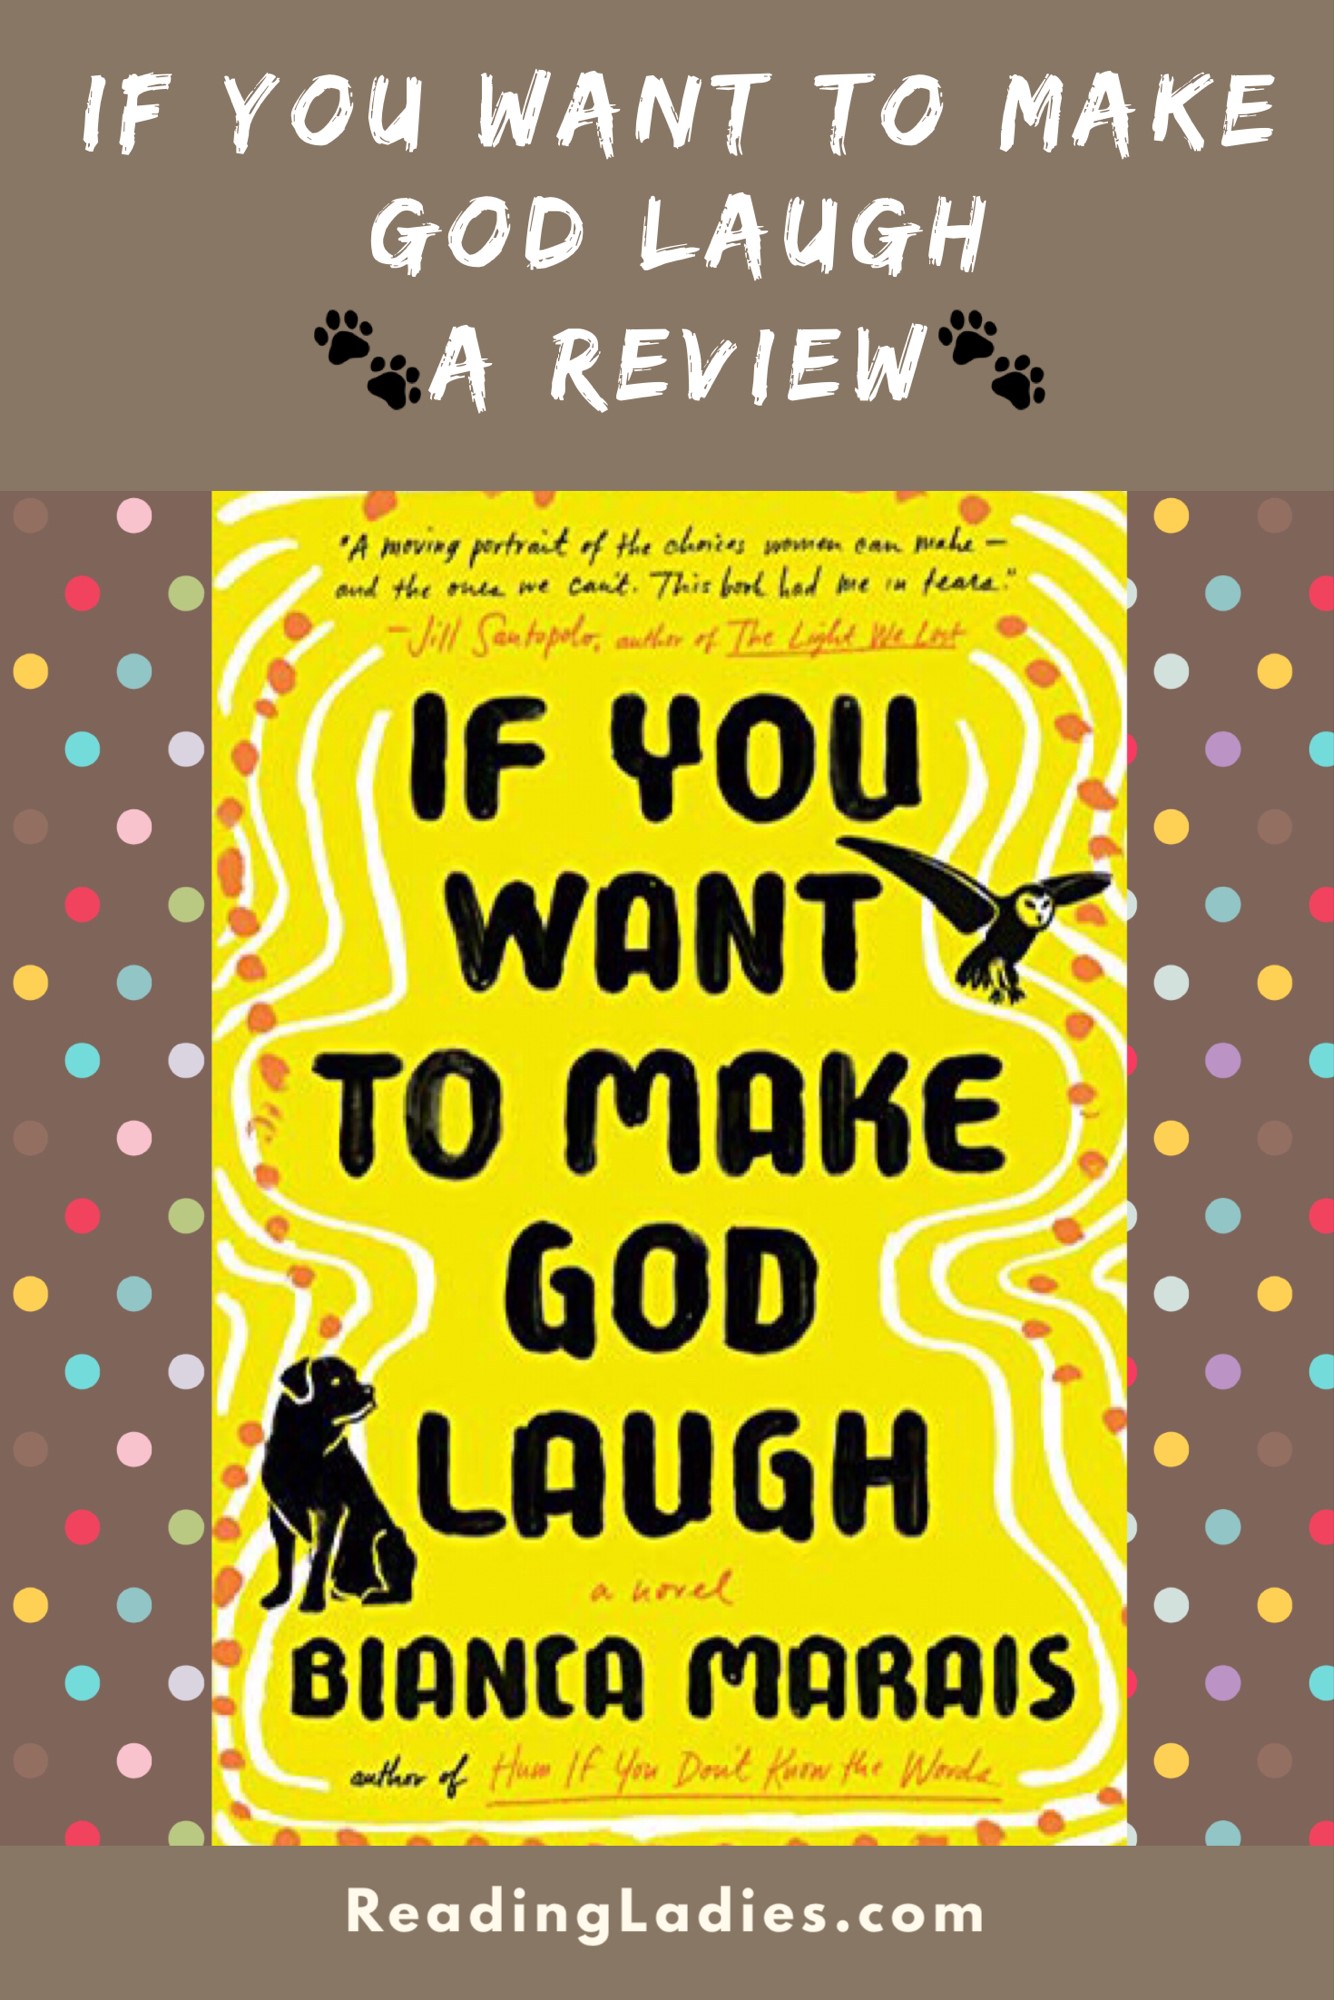 If You Want To Make God Laugh by Bianca Marais (cover) black text on a yellow background....a graphic image of a dog and bird surround the title